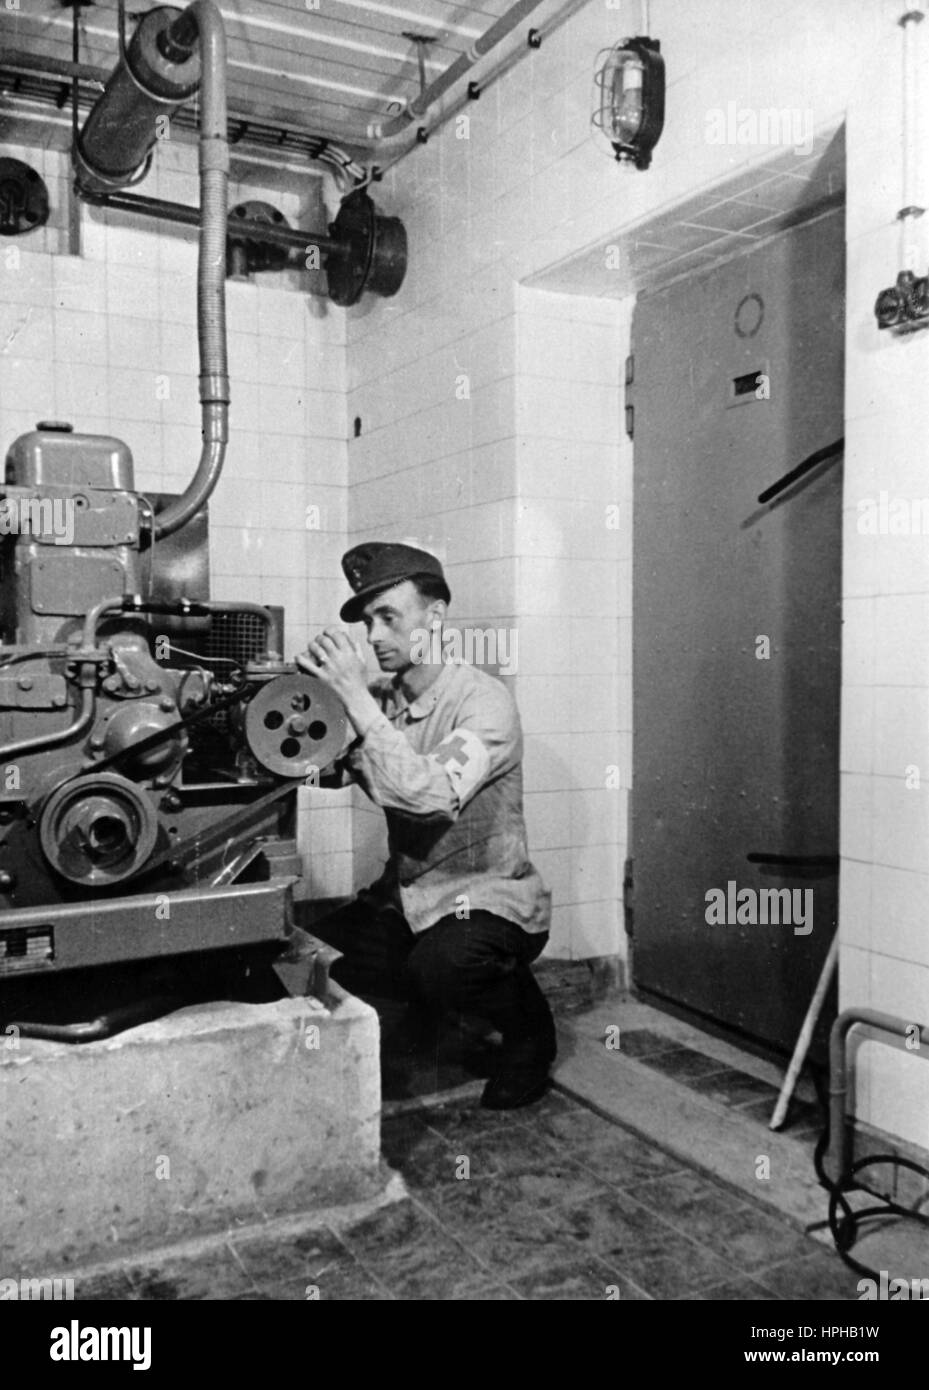 The Nazi propaganda image shows a German Wehrmacht soldier from the medical division checking a ventilation system in a medical bunker on the Atlantic Wall. Published in June 1944. A Nazi reporter has written on the reverse, "Medical services on the Atlantic Wall. Large health bunkers on the Atlantic Wall have their own light and ventilation systems, enabling doctors and health workers to provide proper, hygienic healthcare to the wounded." Fotoarchiv für Zeitgeschichte - NO WIRE SERVICE - | usage worldwide Stock Photo